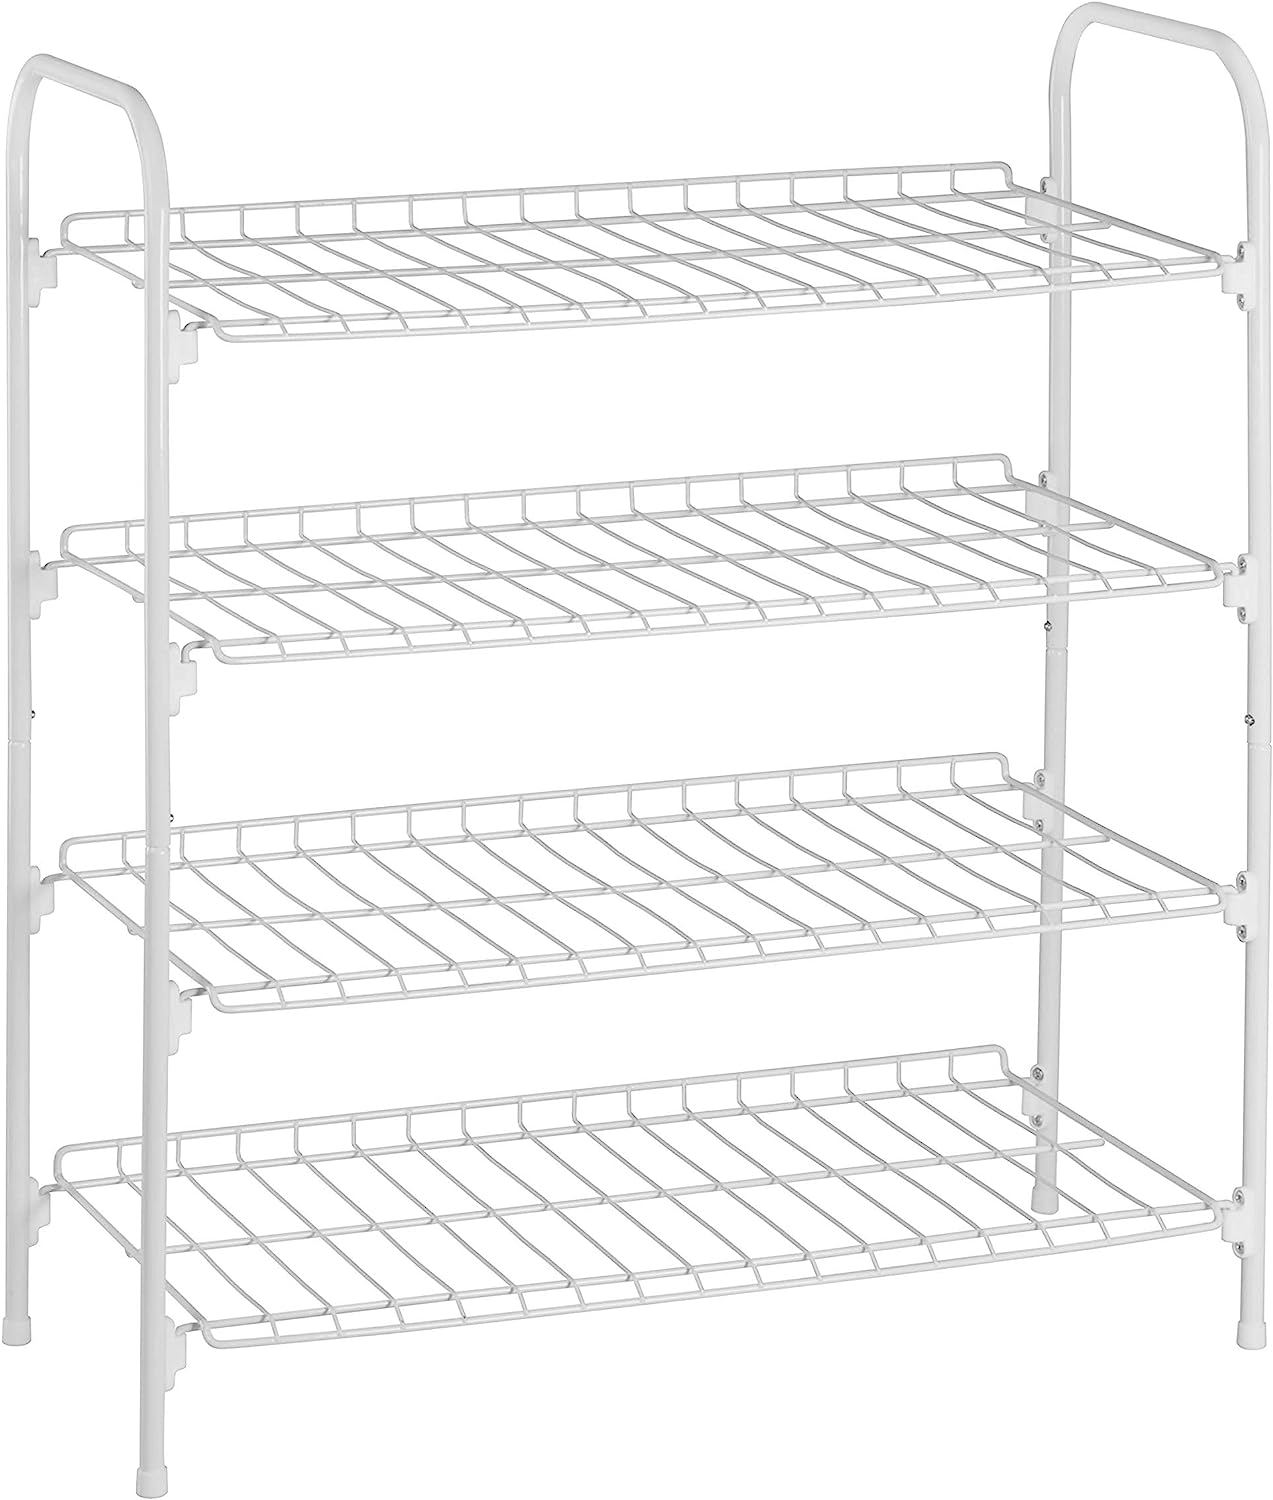 Honey-Can-Do 4-Tier White Metal Shoe Rack and [...]